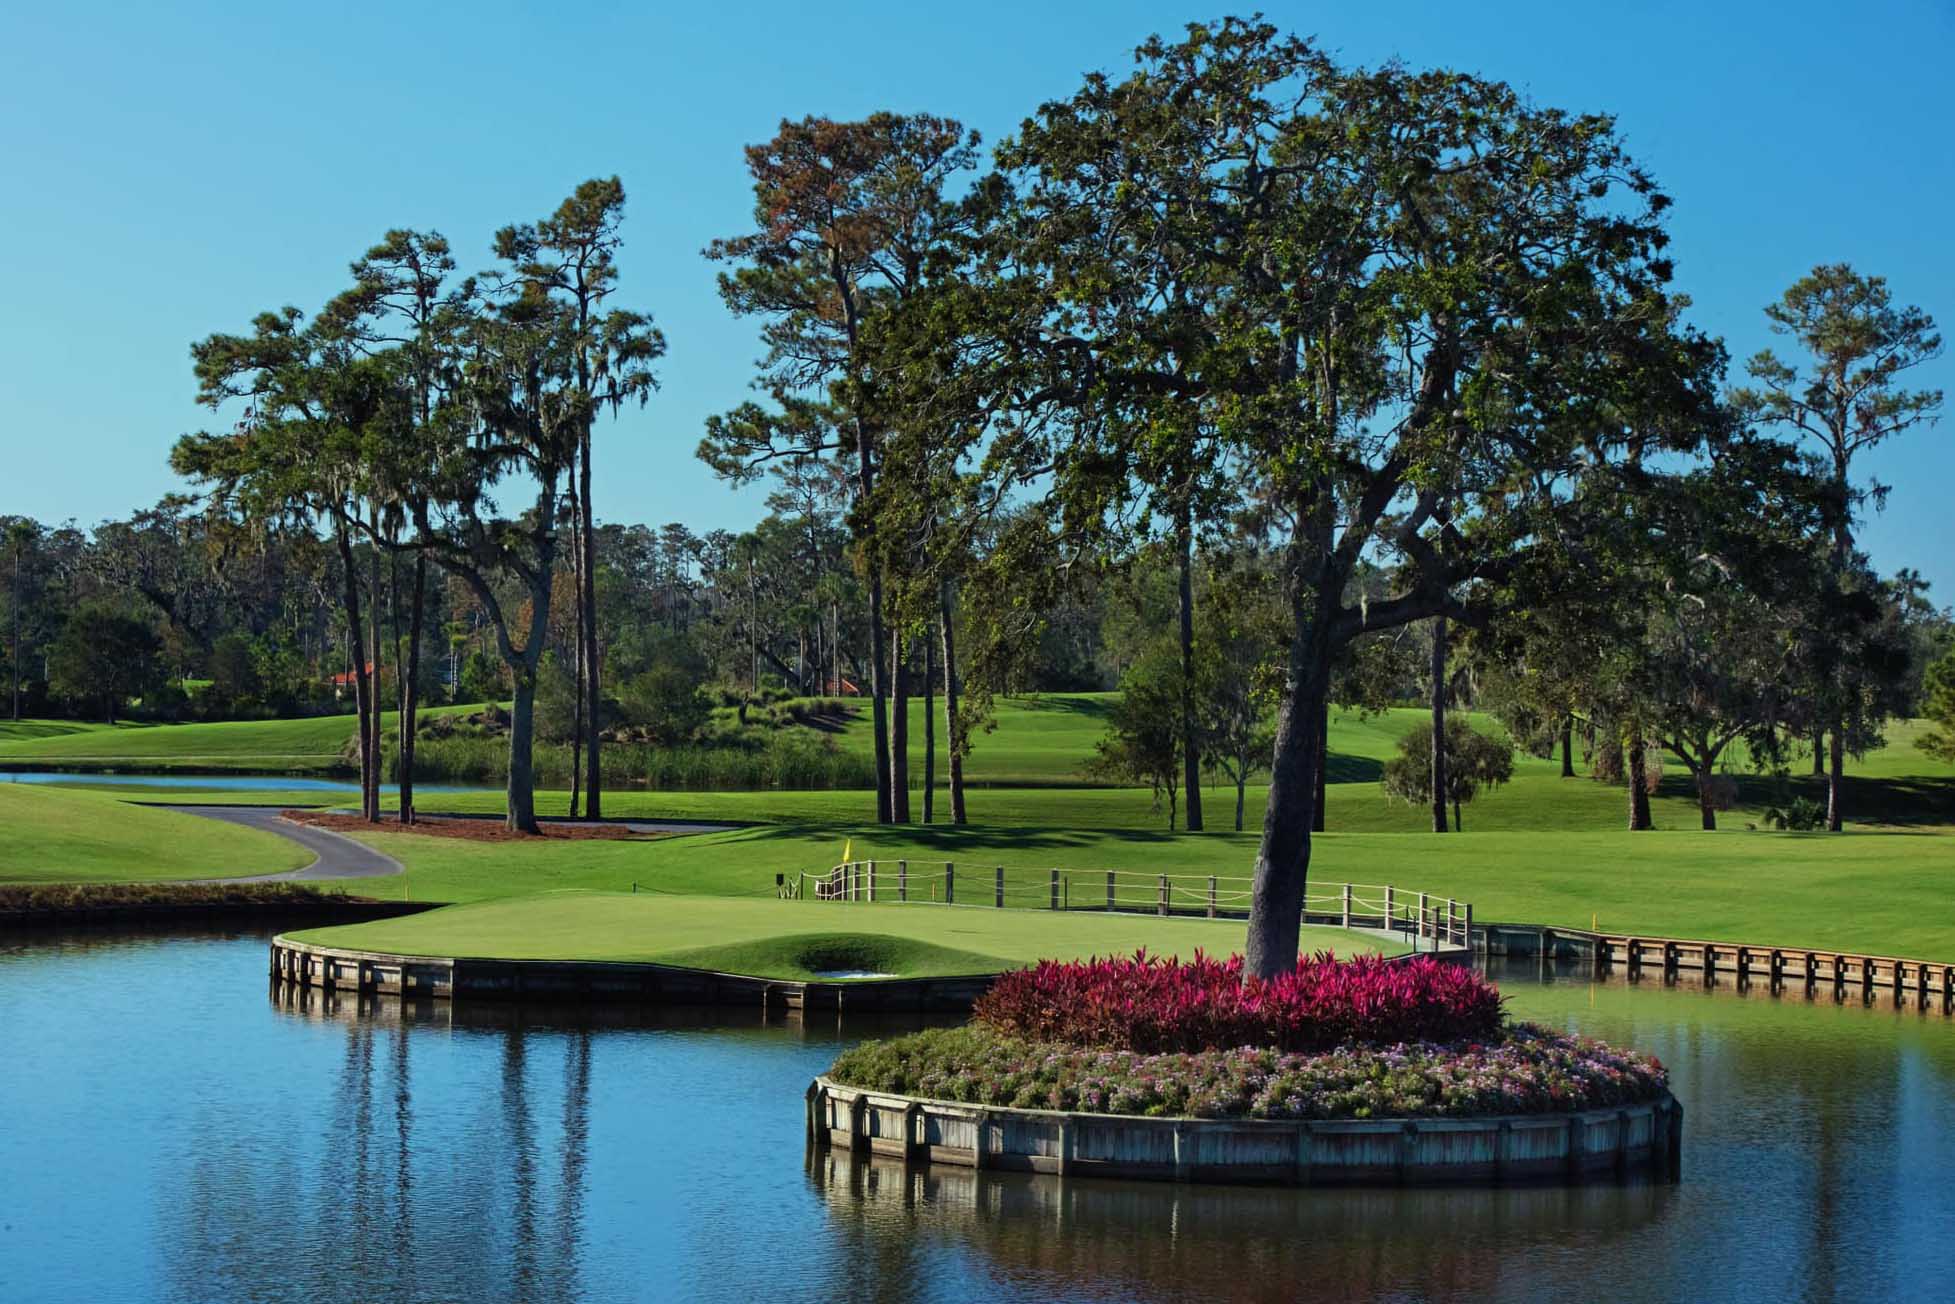 TPC Sawgrass Golf Course and tree